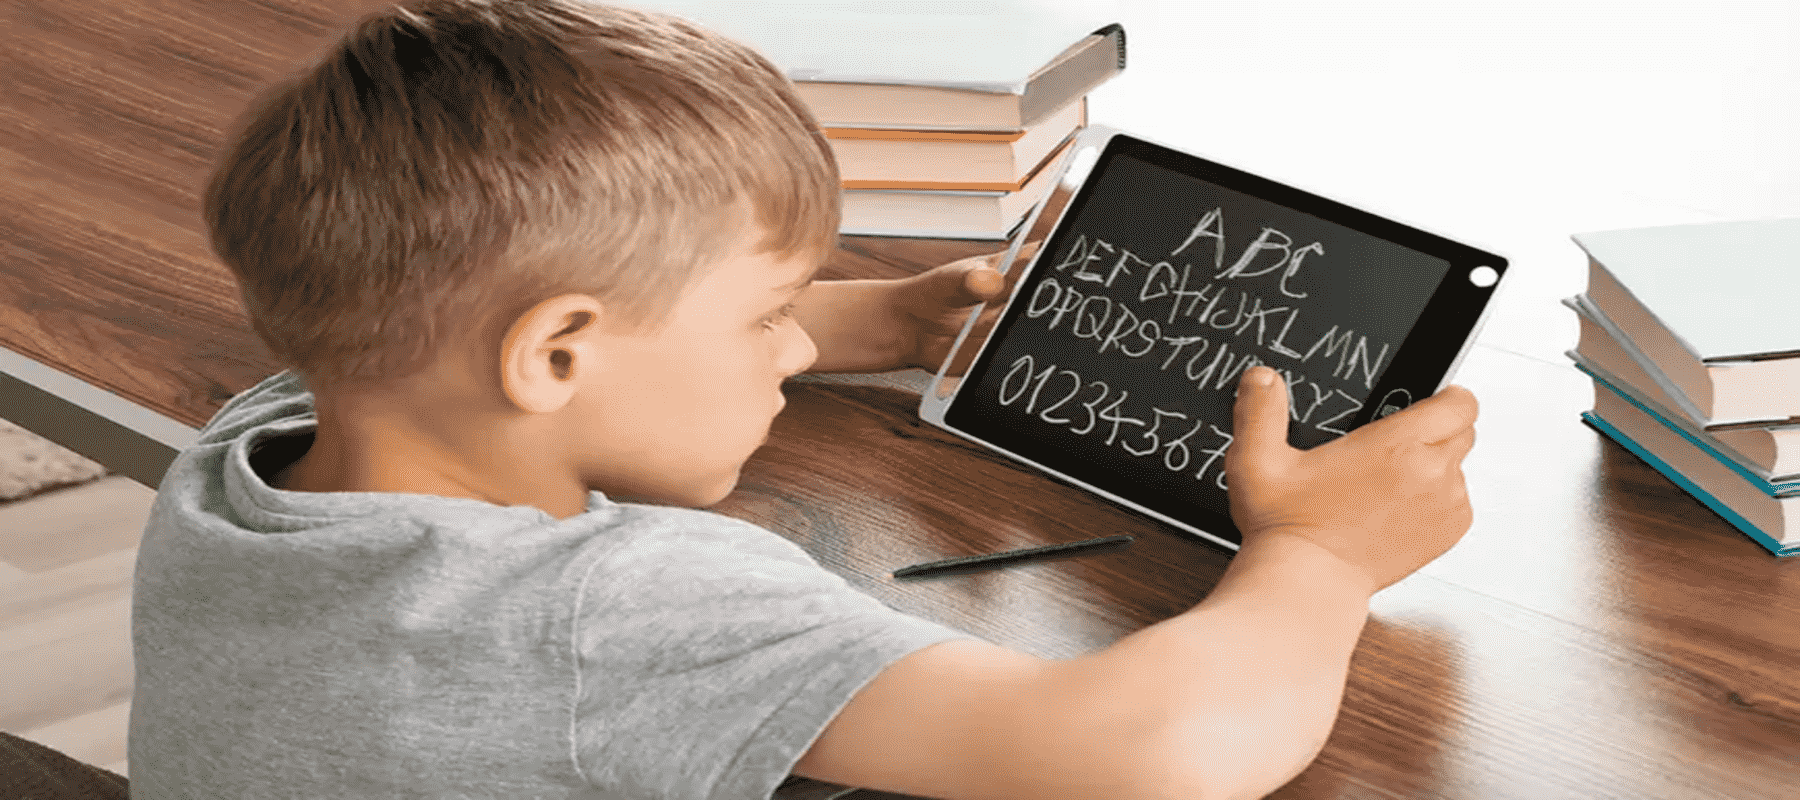 Top 3 Toddler’s best drawing and writing board